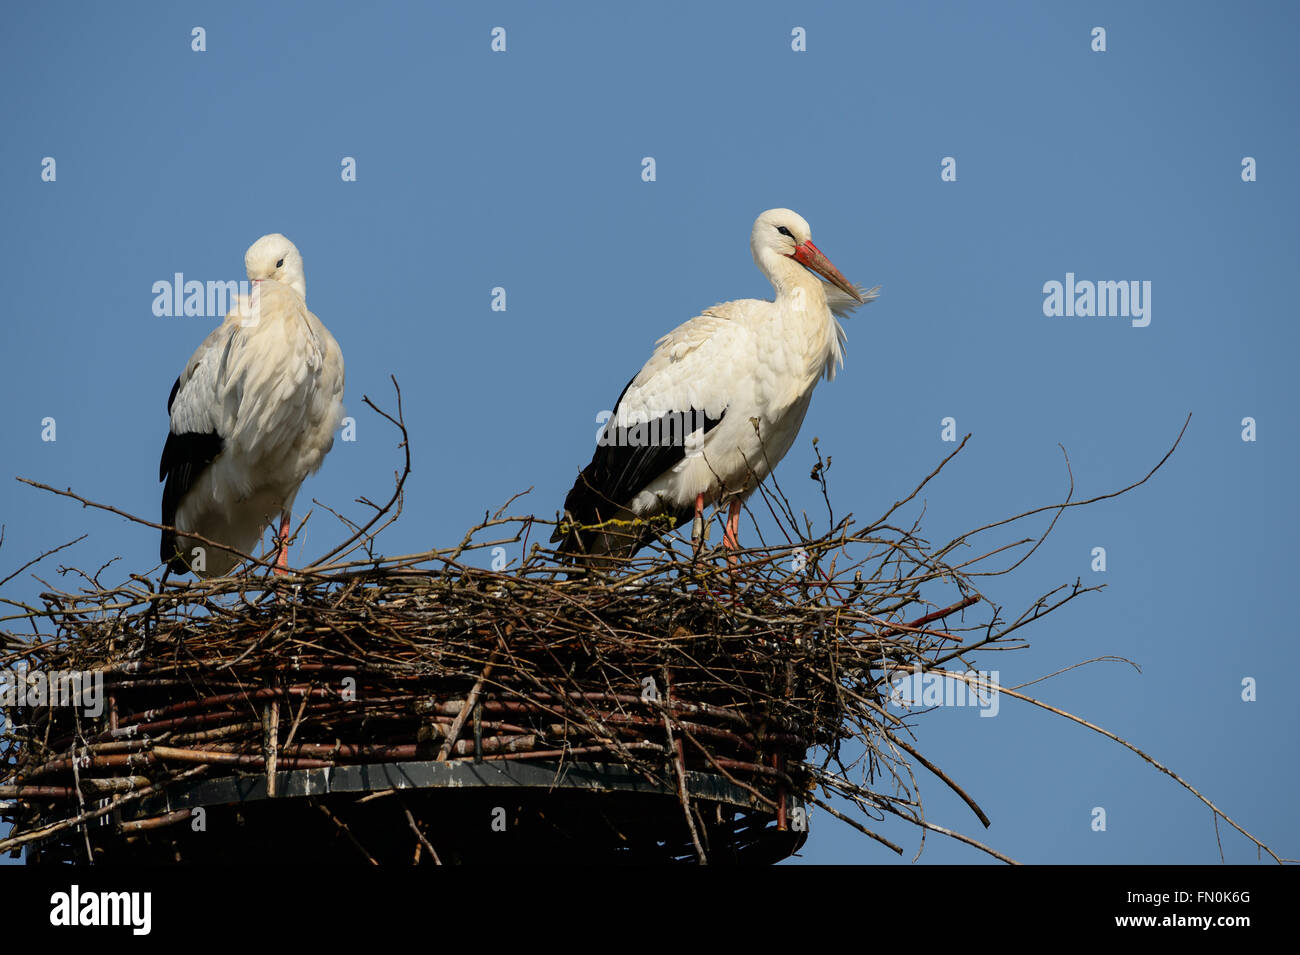 Two white storks on their nest in early spring Stock Photo